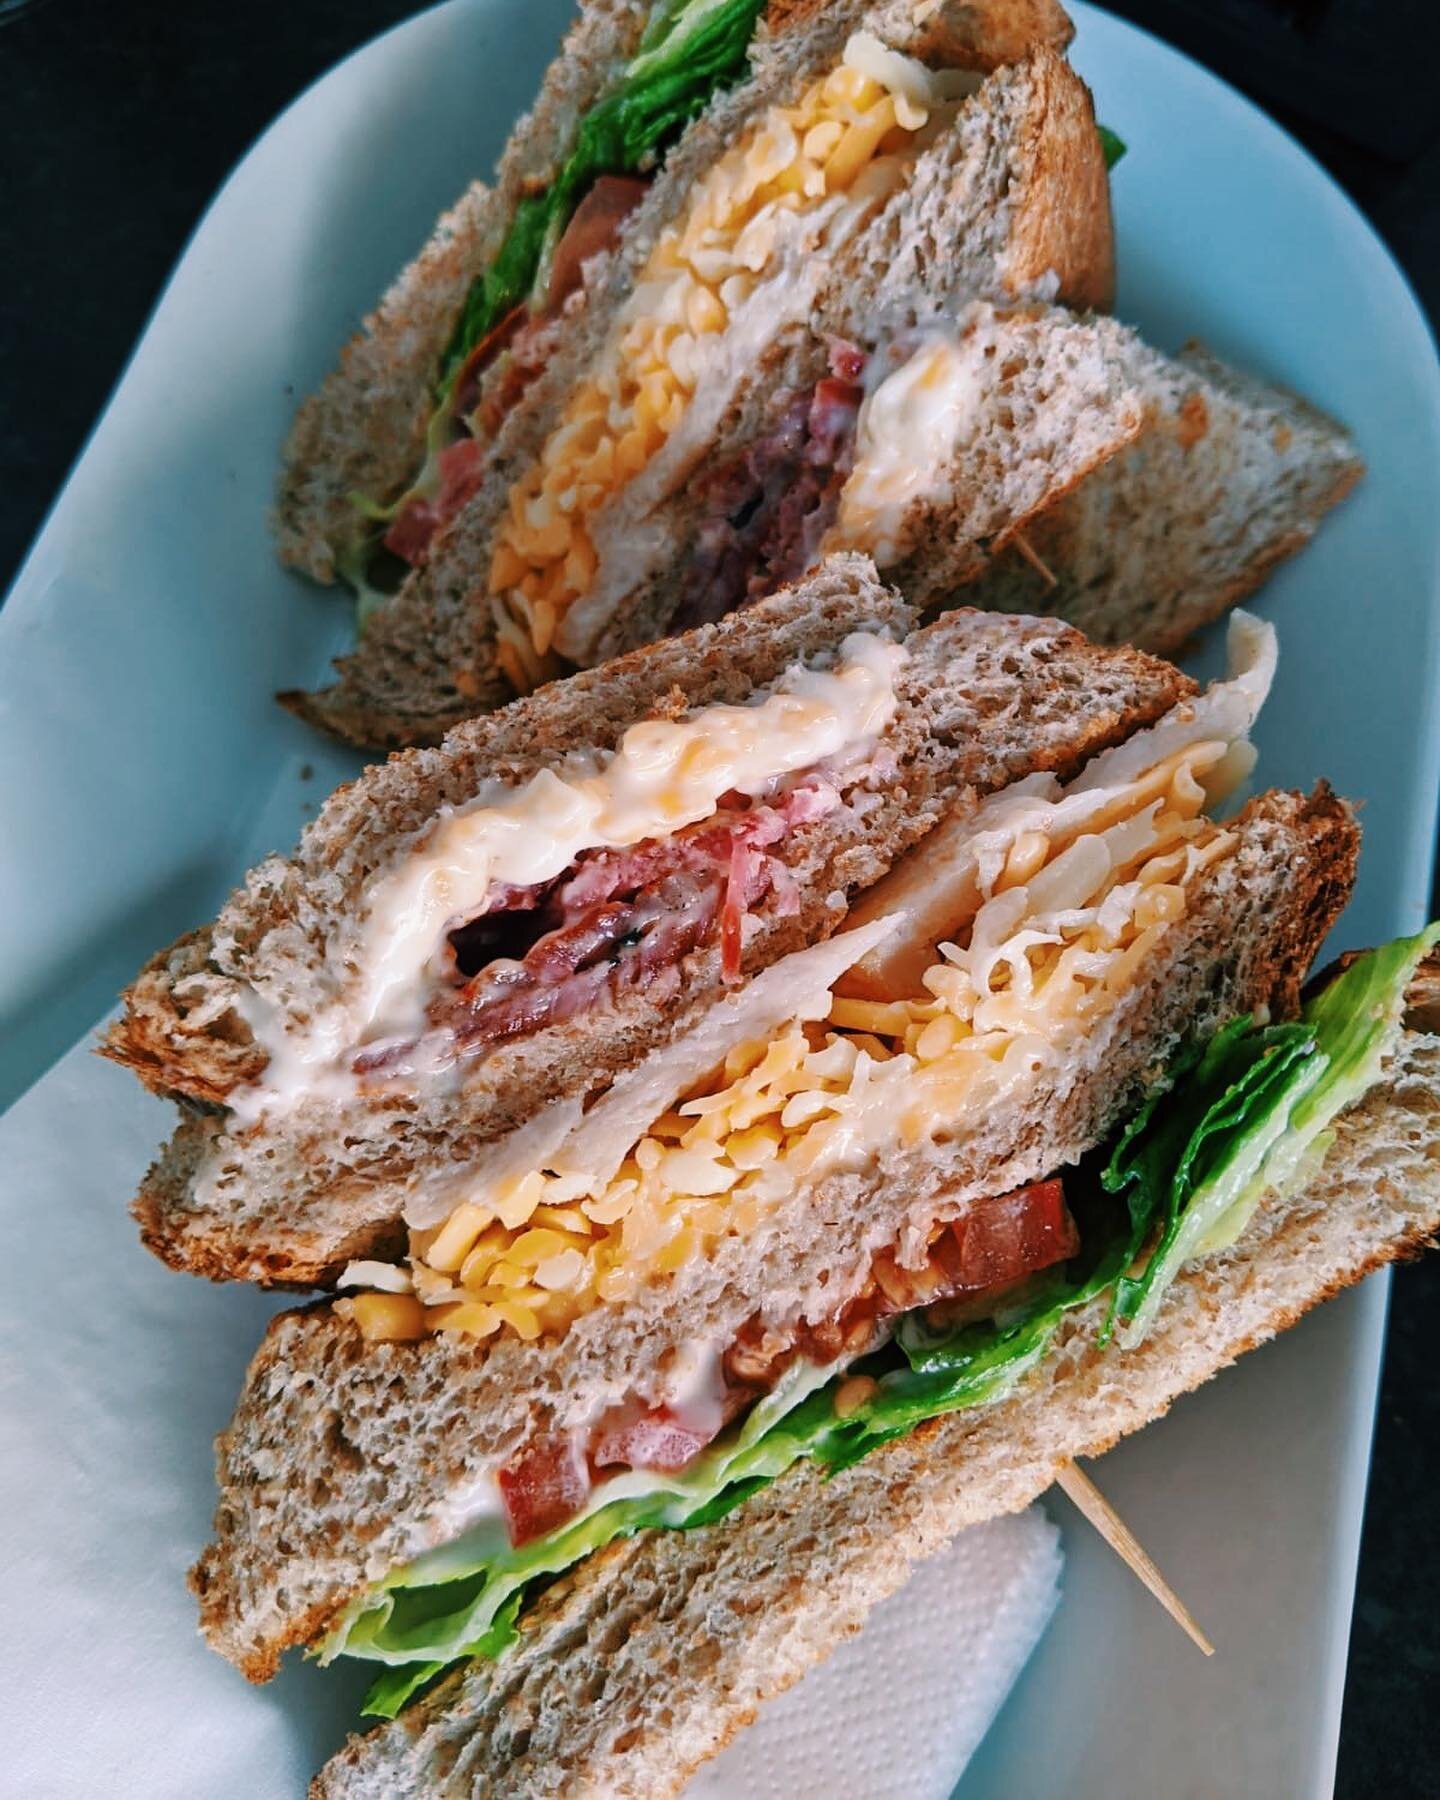 For when you&rsquo;re that bit extra hungry: triple stacked sandwiches should do the trick 🥪 
.
.
.
.
.
.
.
.
.
.
.
.
#nottingham #notts #lovenotts #indienotts #visitnottingham #cafe #hockley #cafes #breakfast #brunch #lunch #cake #coffee #cakeandco